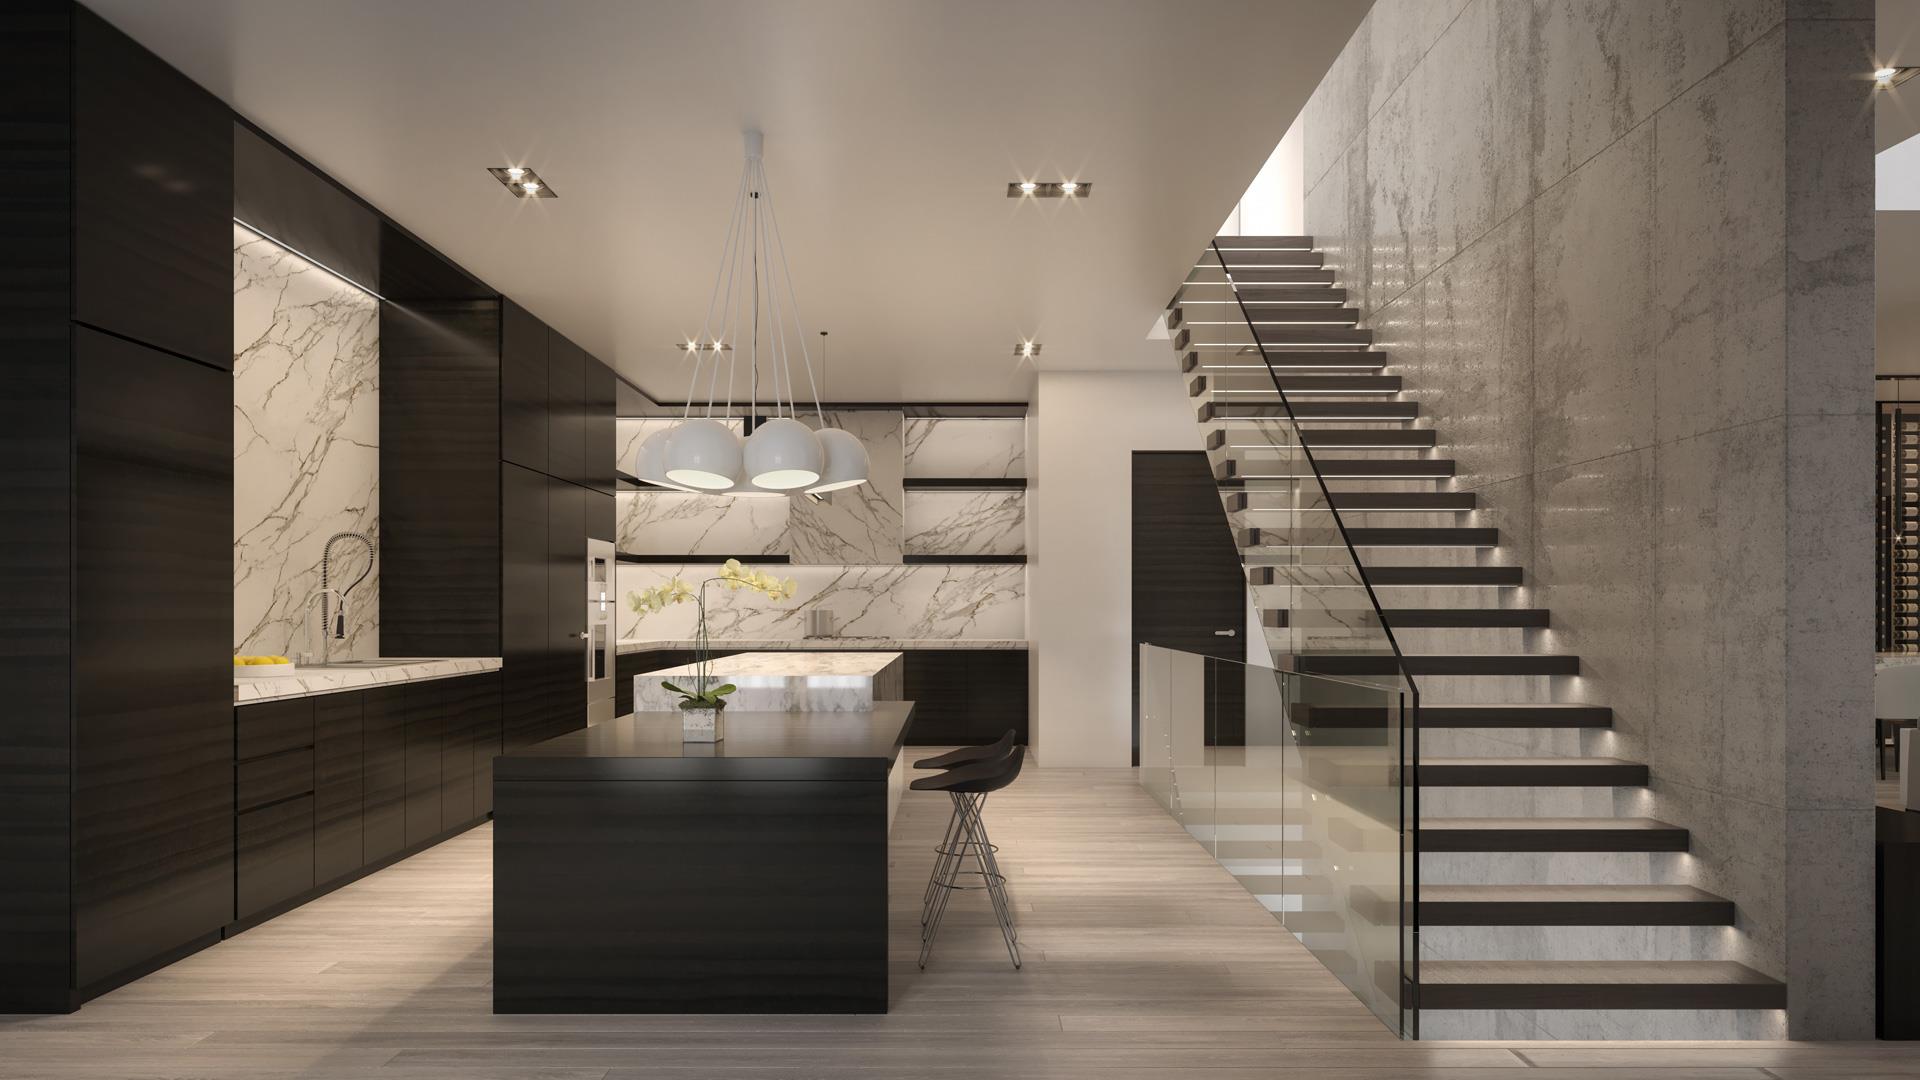 Rendering of 469 Spadina Homes interior kitchen and staircase.